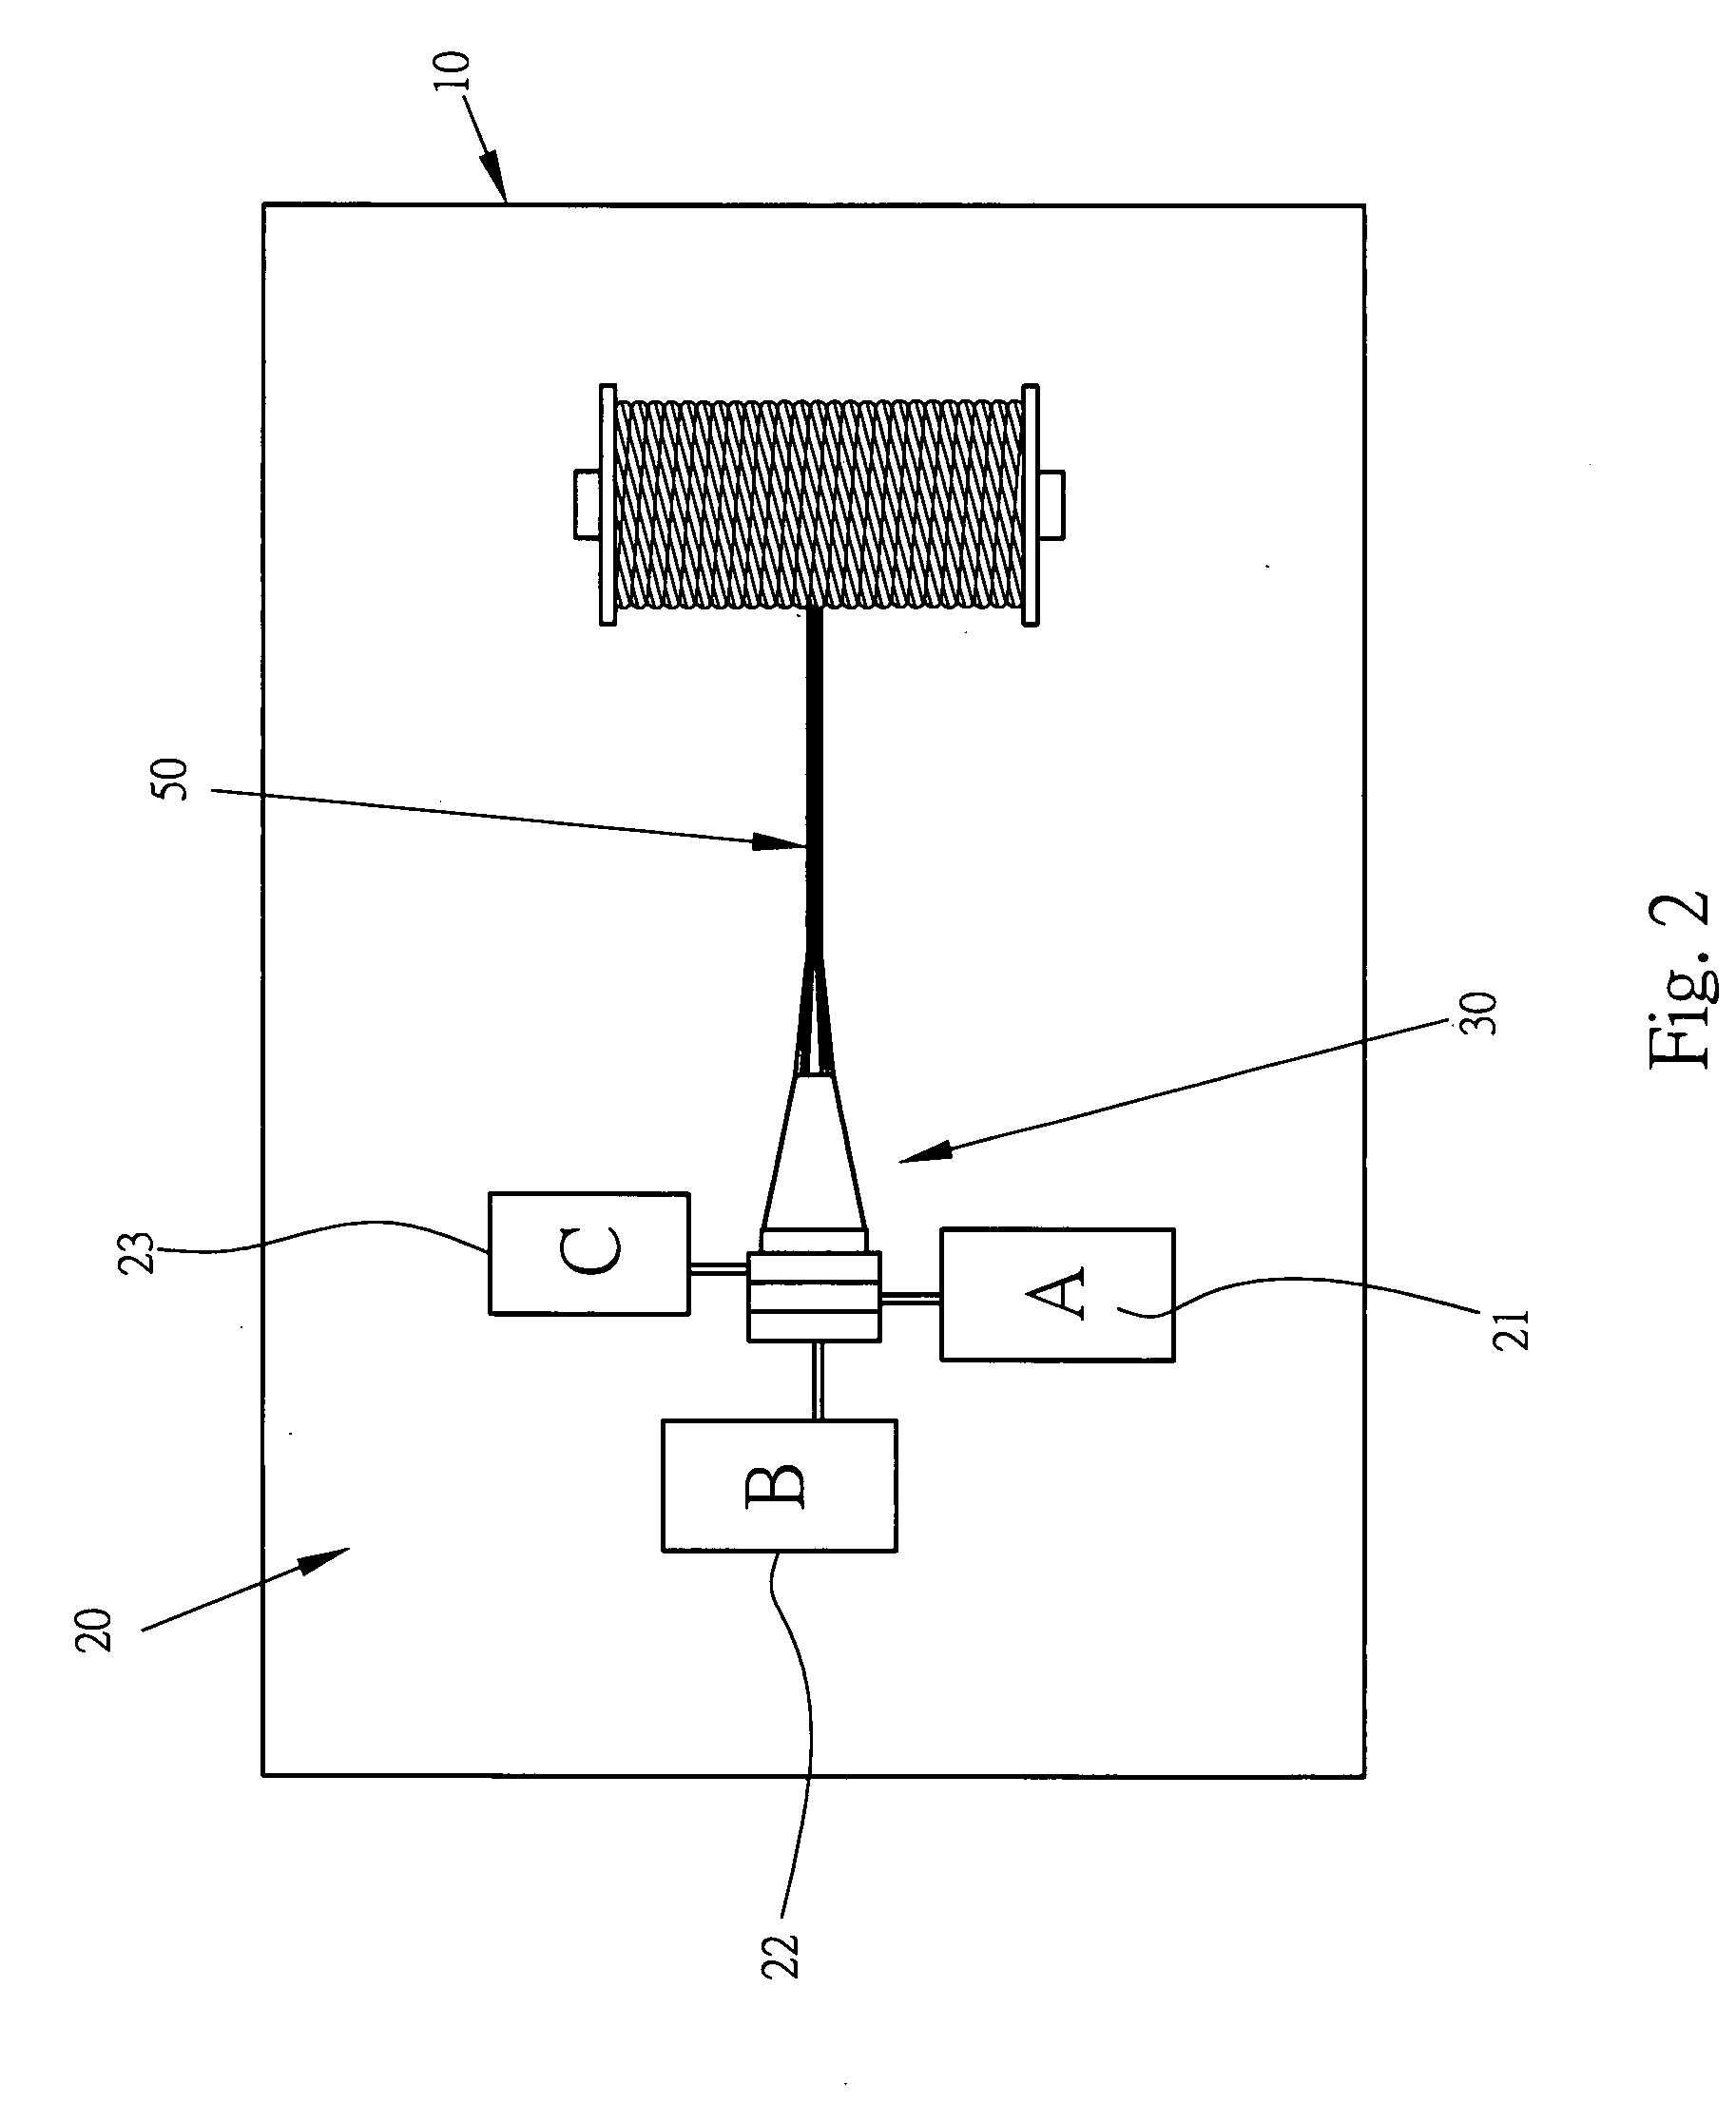 Strings of sport rackets and method for making the same